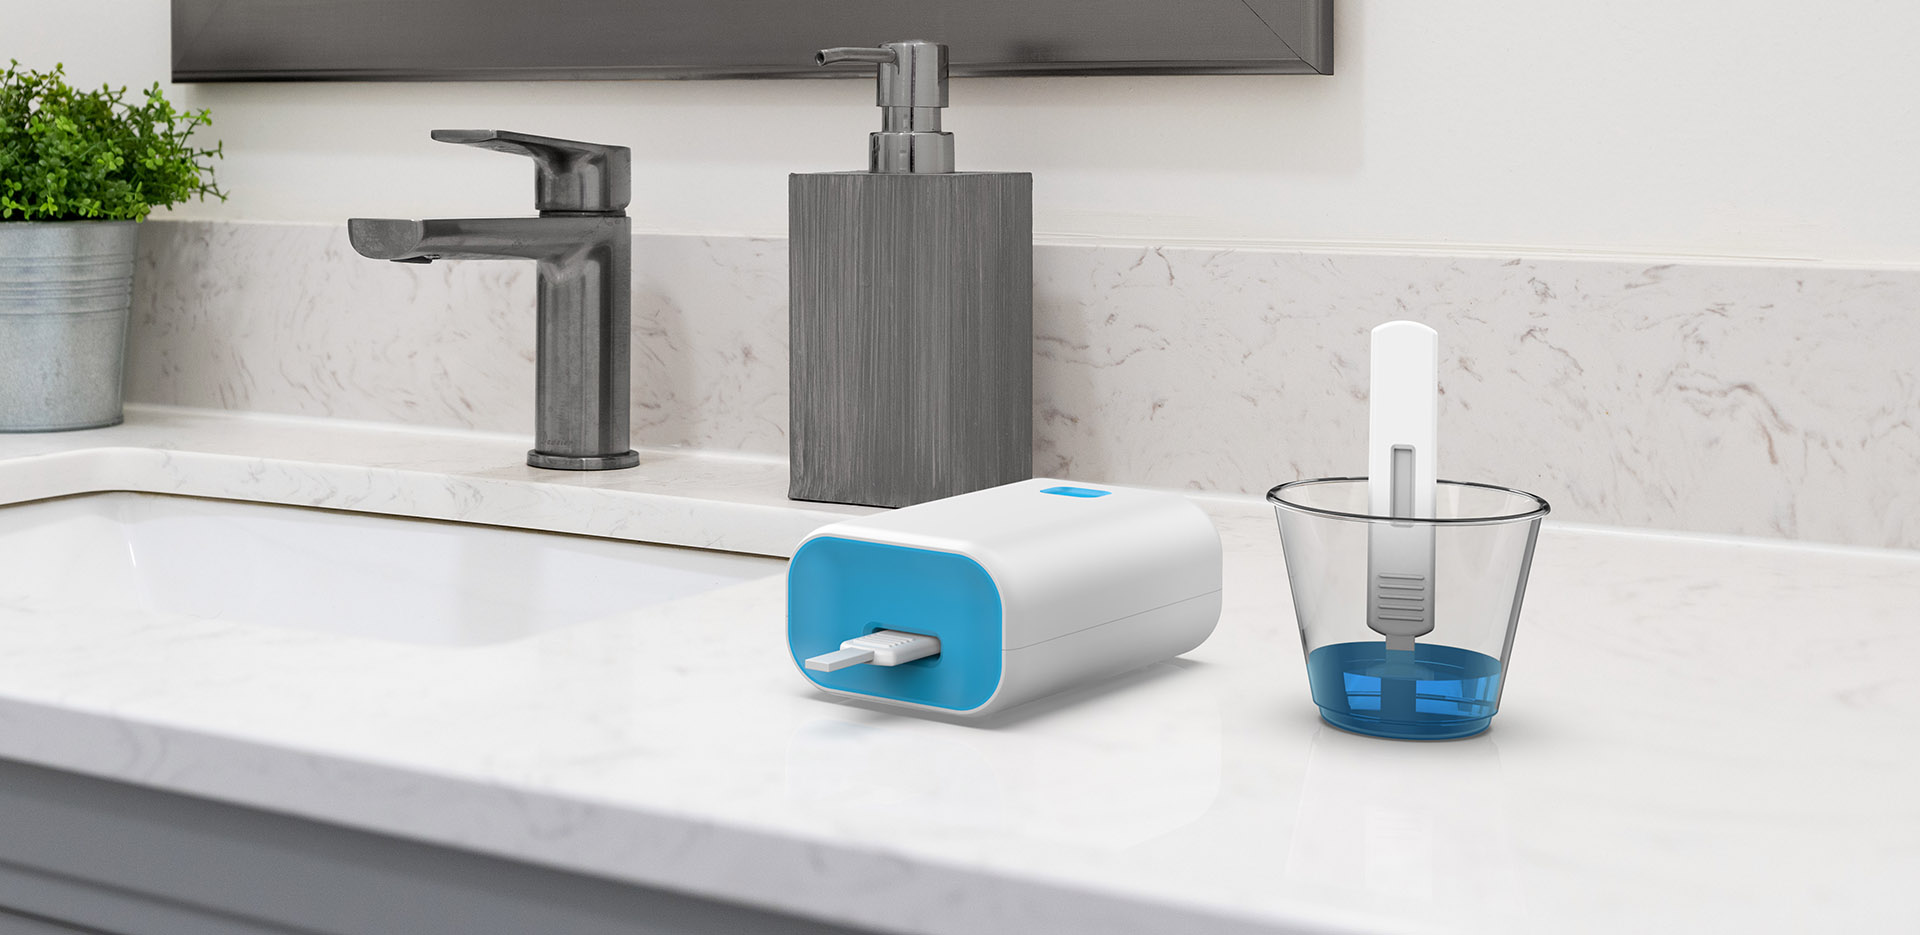 A conceptual rendering of the at-home diagnostic device next to a bathroom sink.